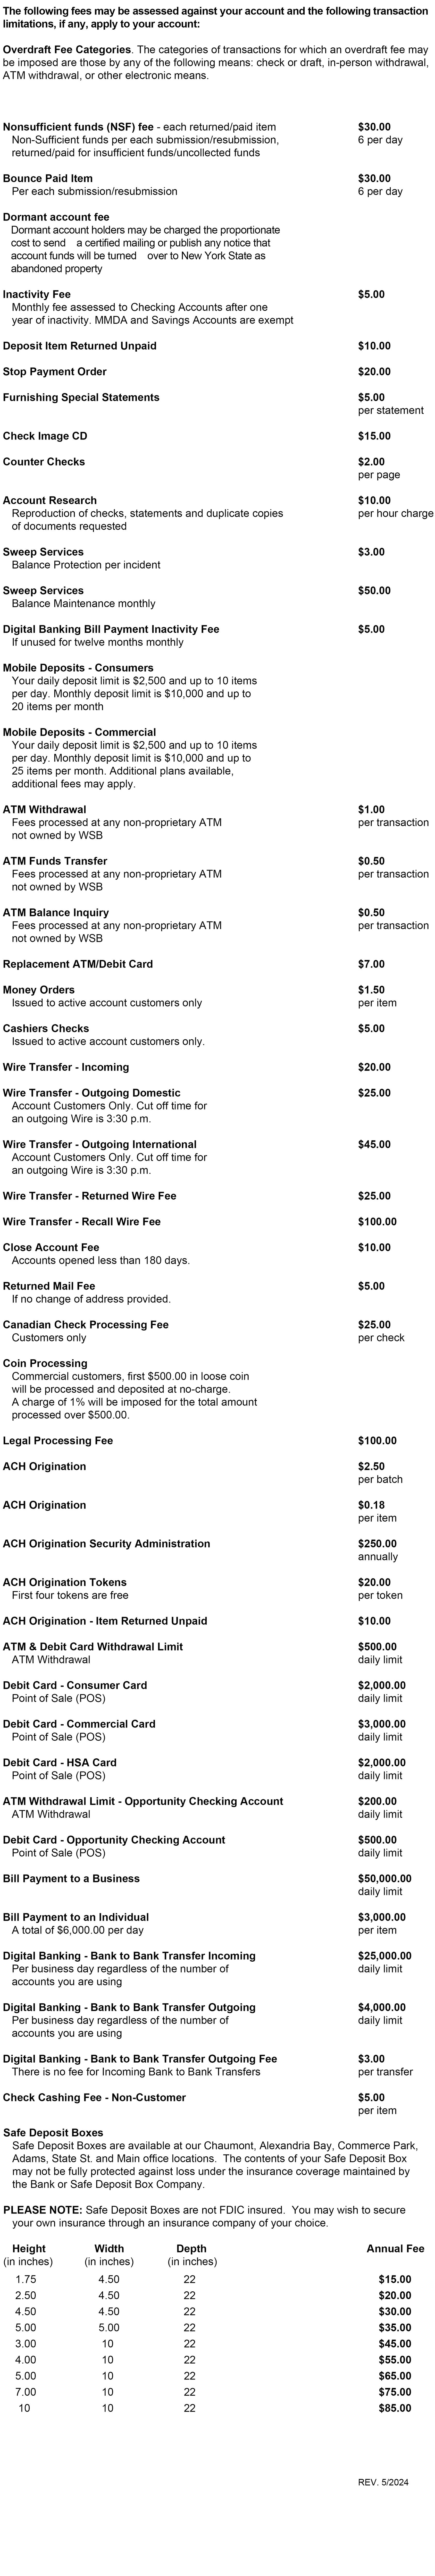 Table of fees and service charges.